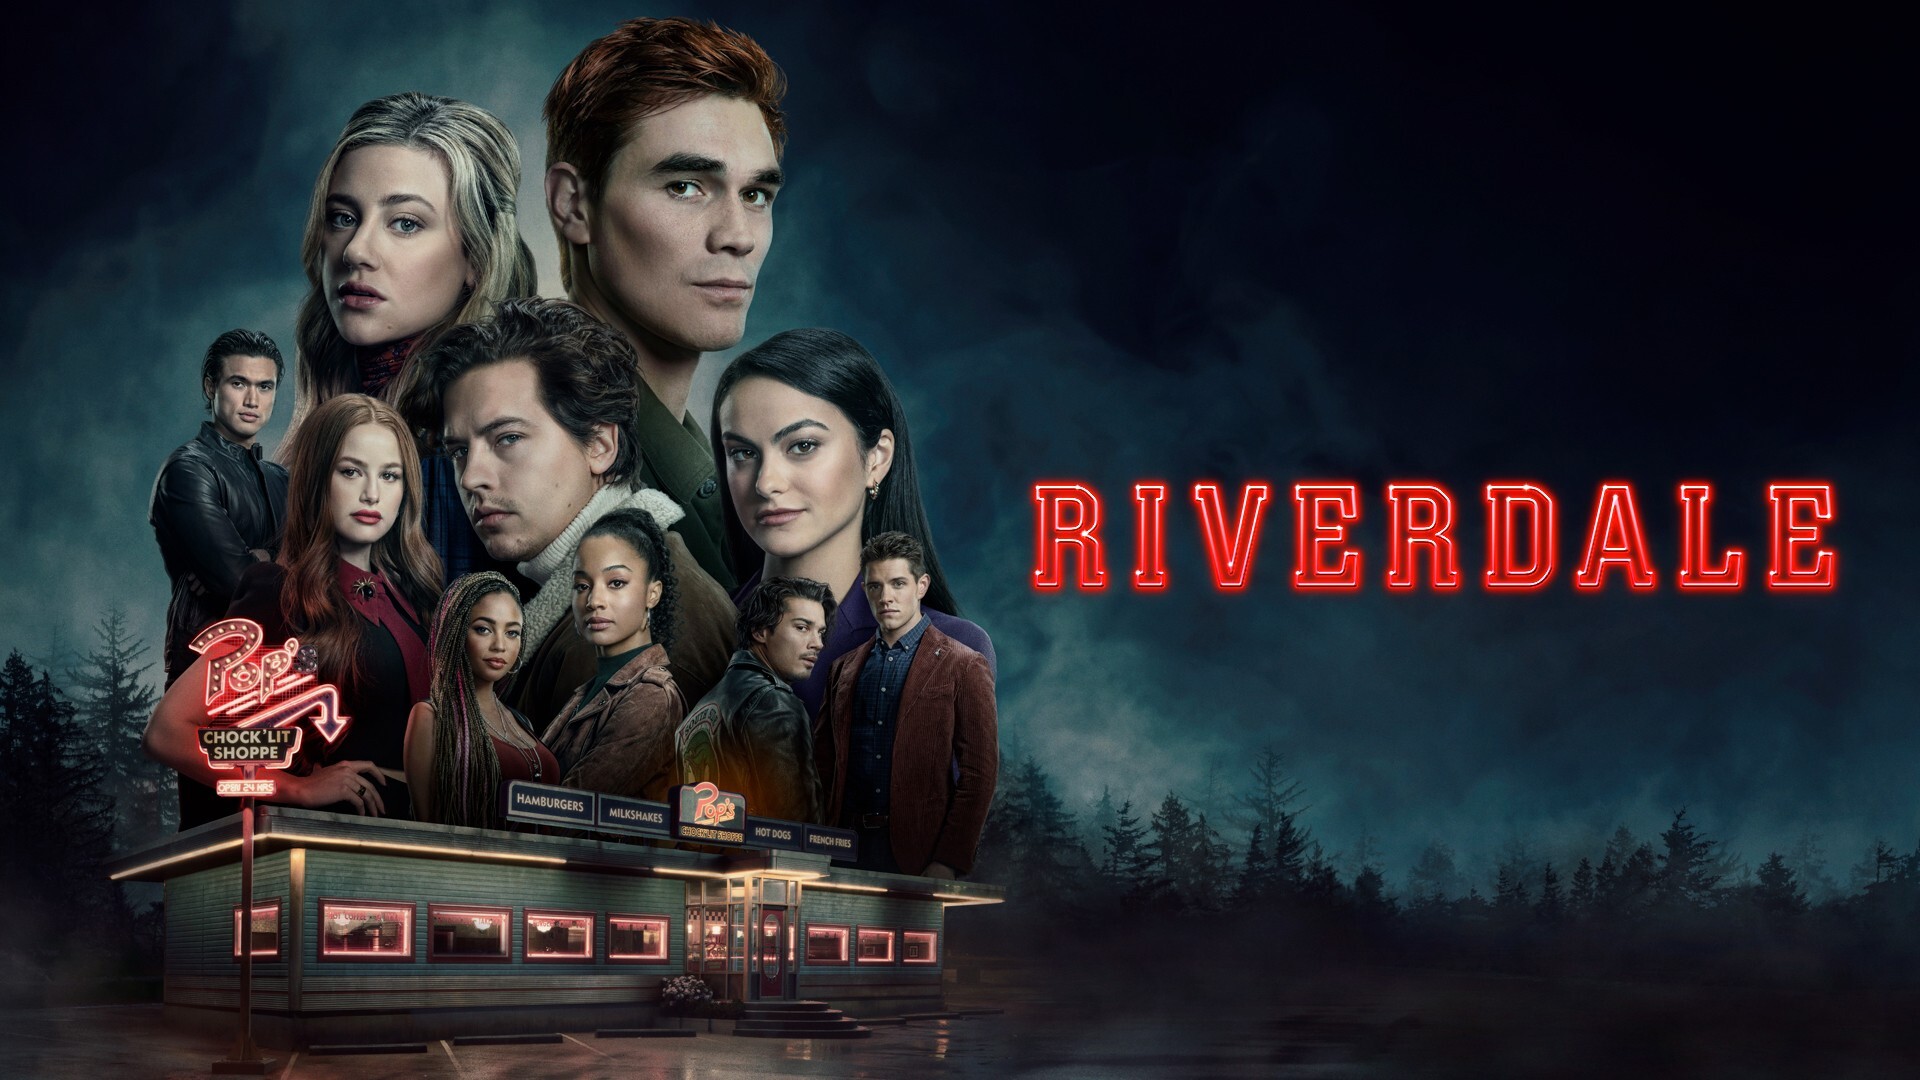 Riverdale (TV Series): The American teen mistery drama, Plot based on Archie Comics graphic novels. 1920x1080 Full HD Background.